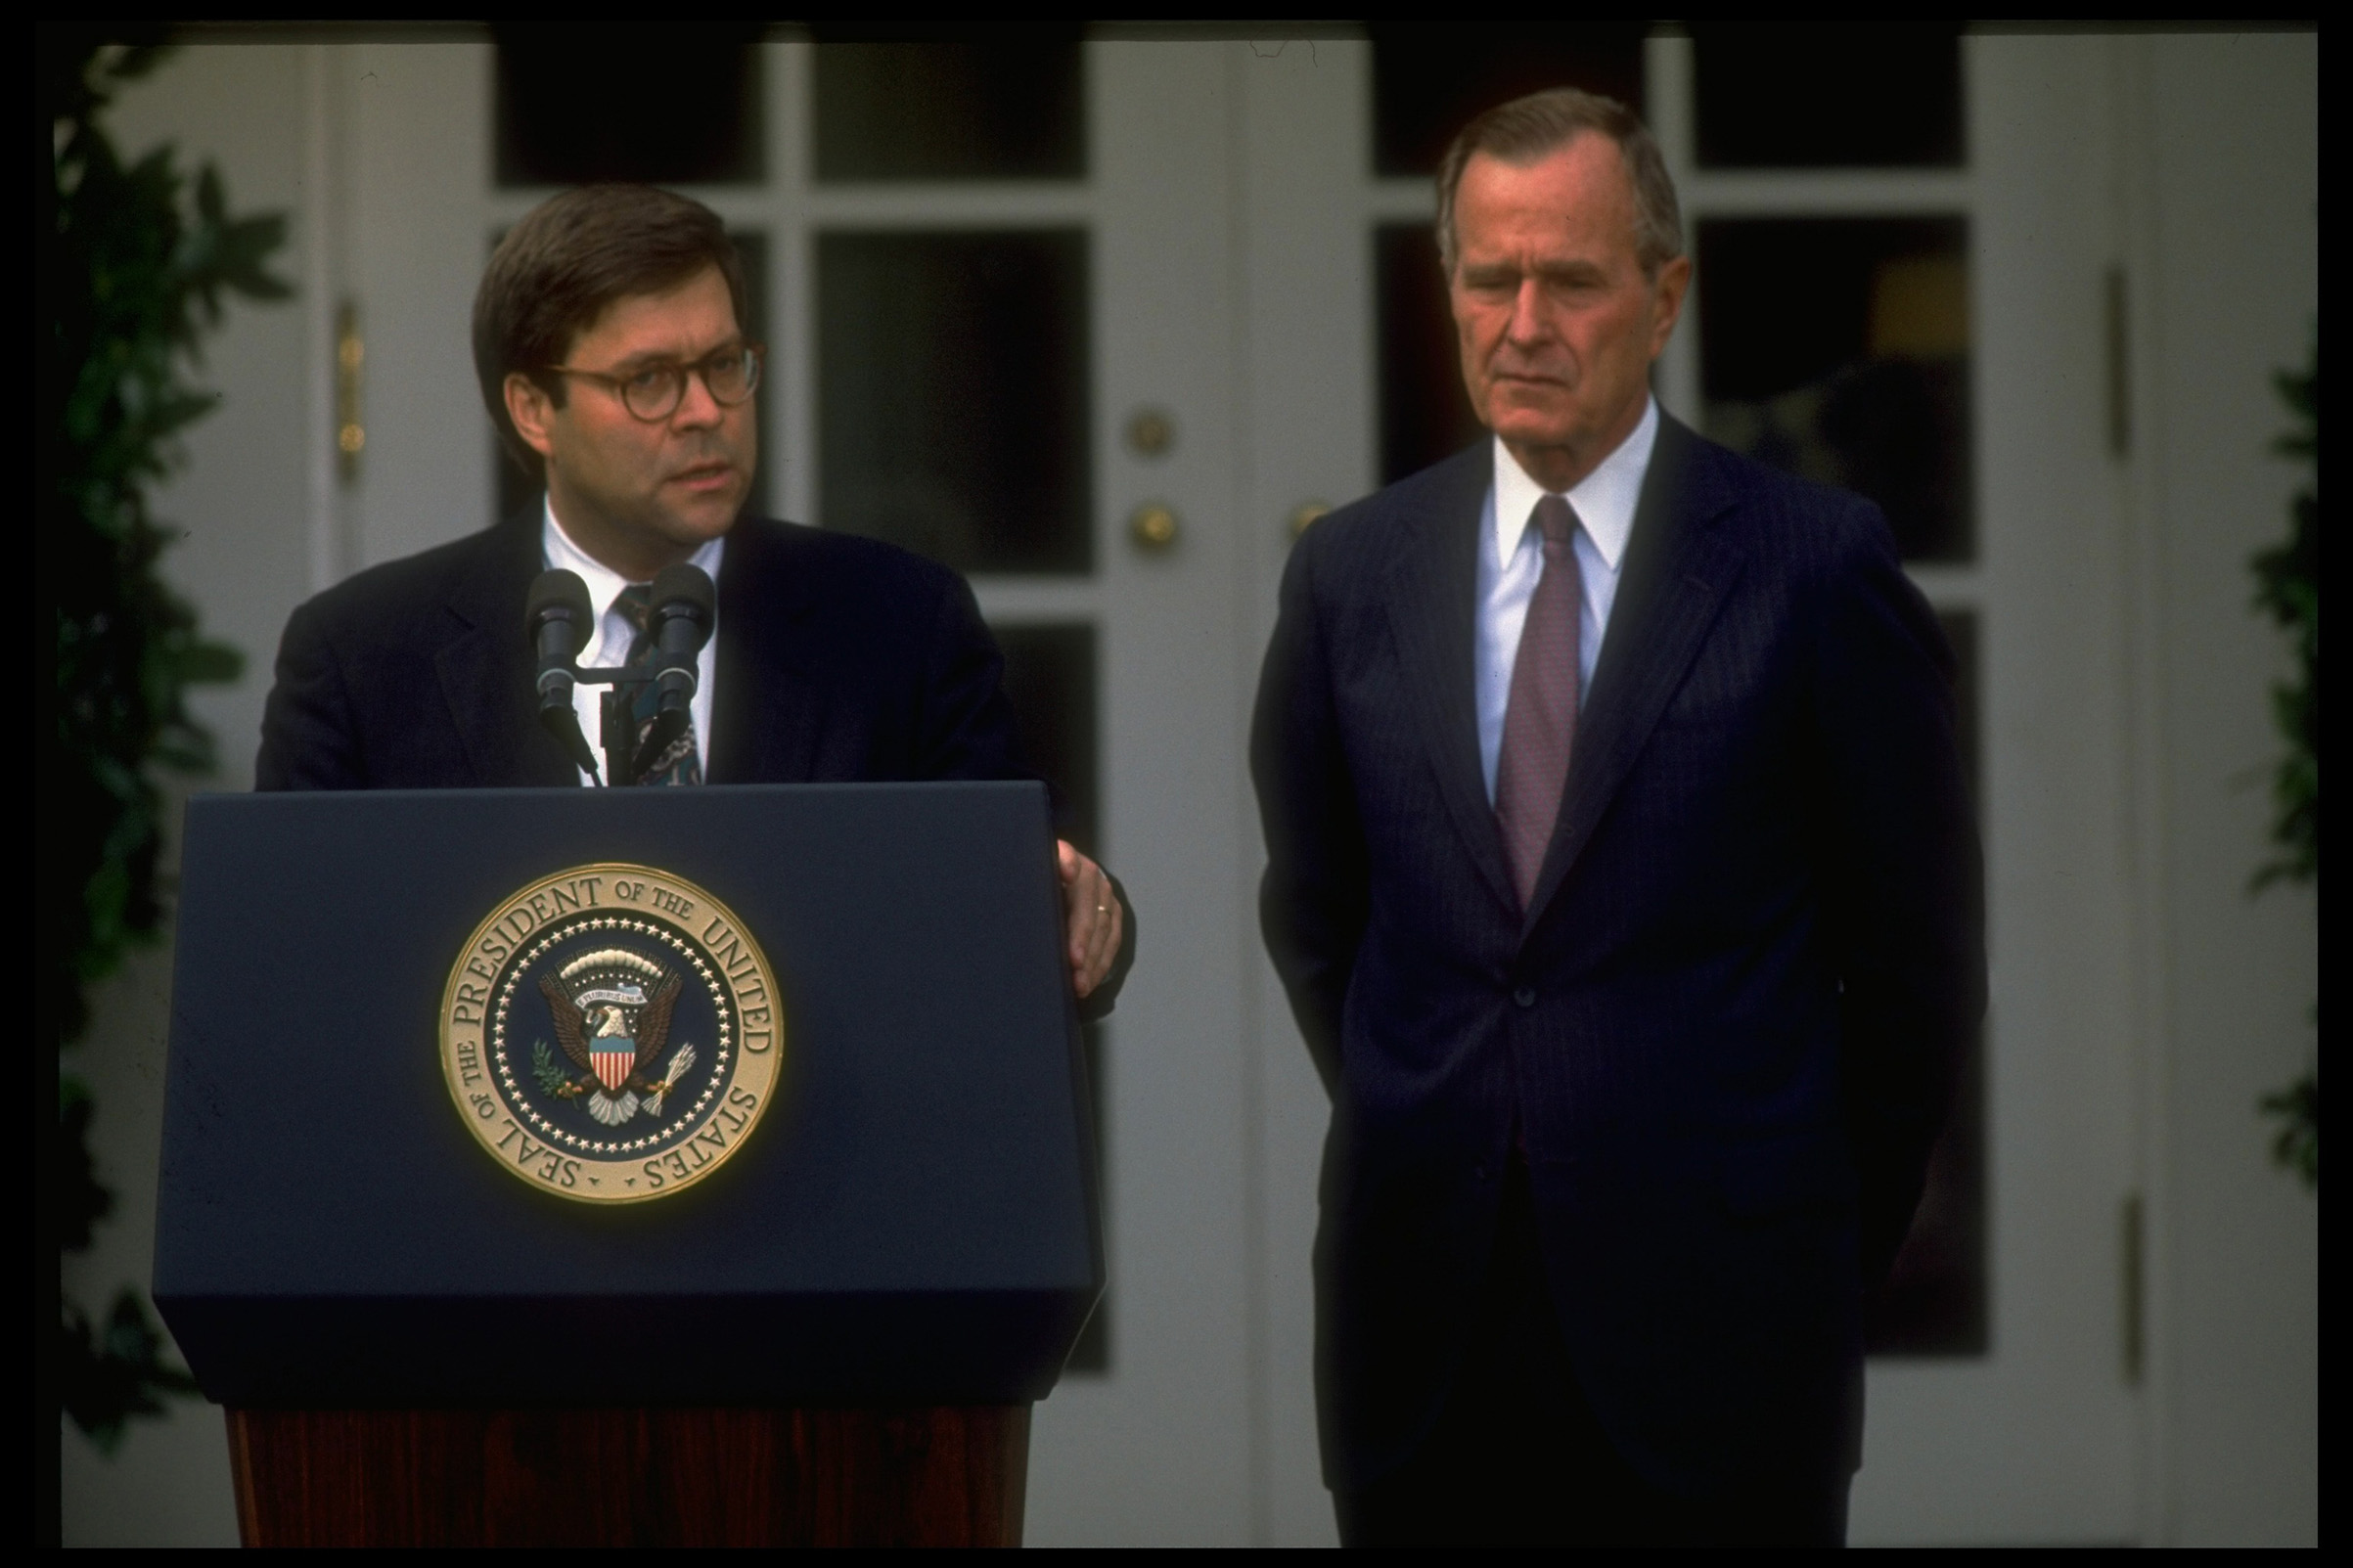 Barr joins President George H.W. Bush for the announcement of his nomination as AG in 1991 (Dirck Halstead—TIME-LIFE Images Collection/Getty Images)